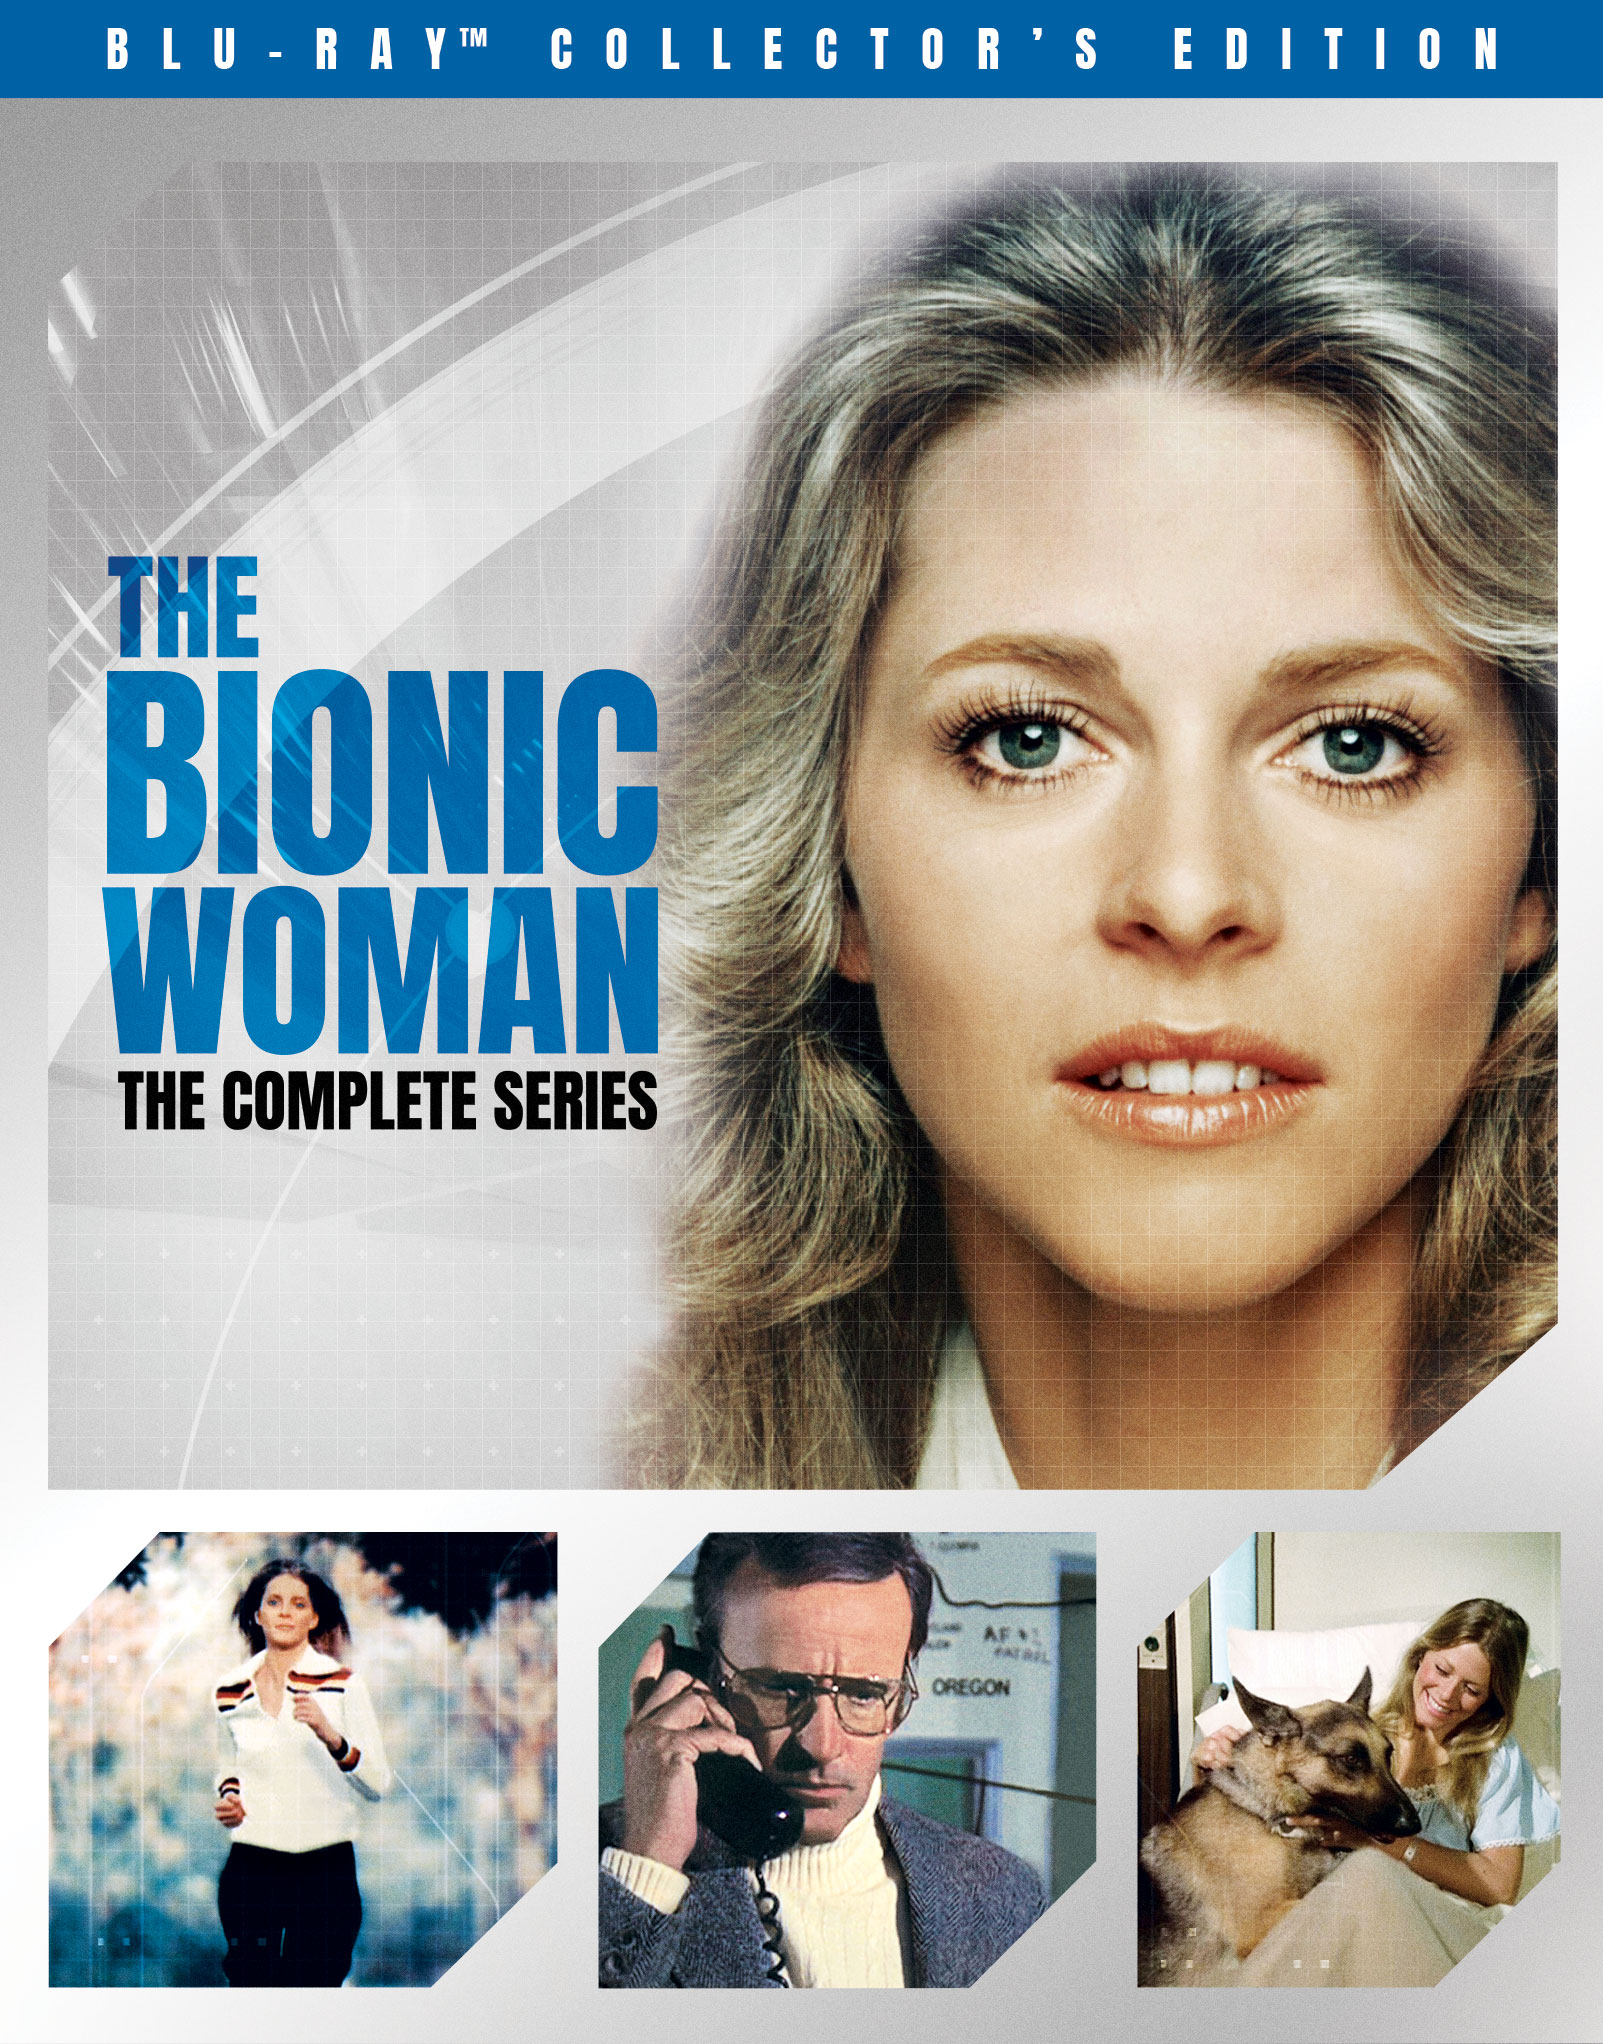 The Bionic Woman The Complete Series Best Buy 